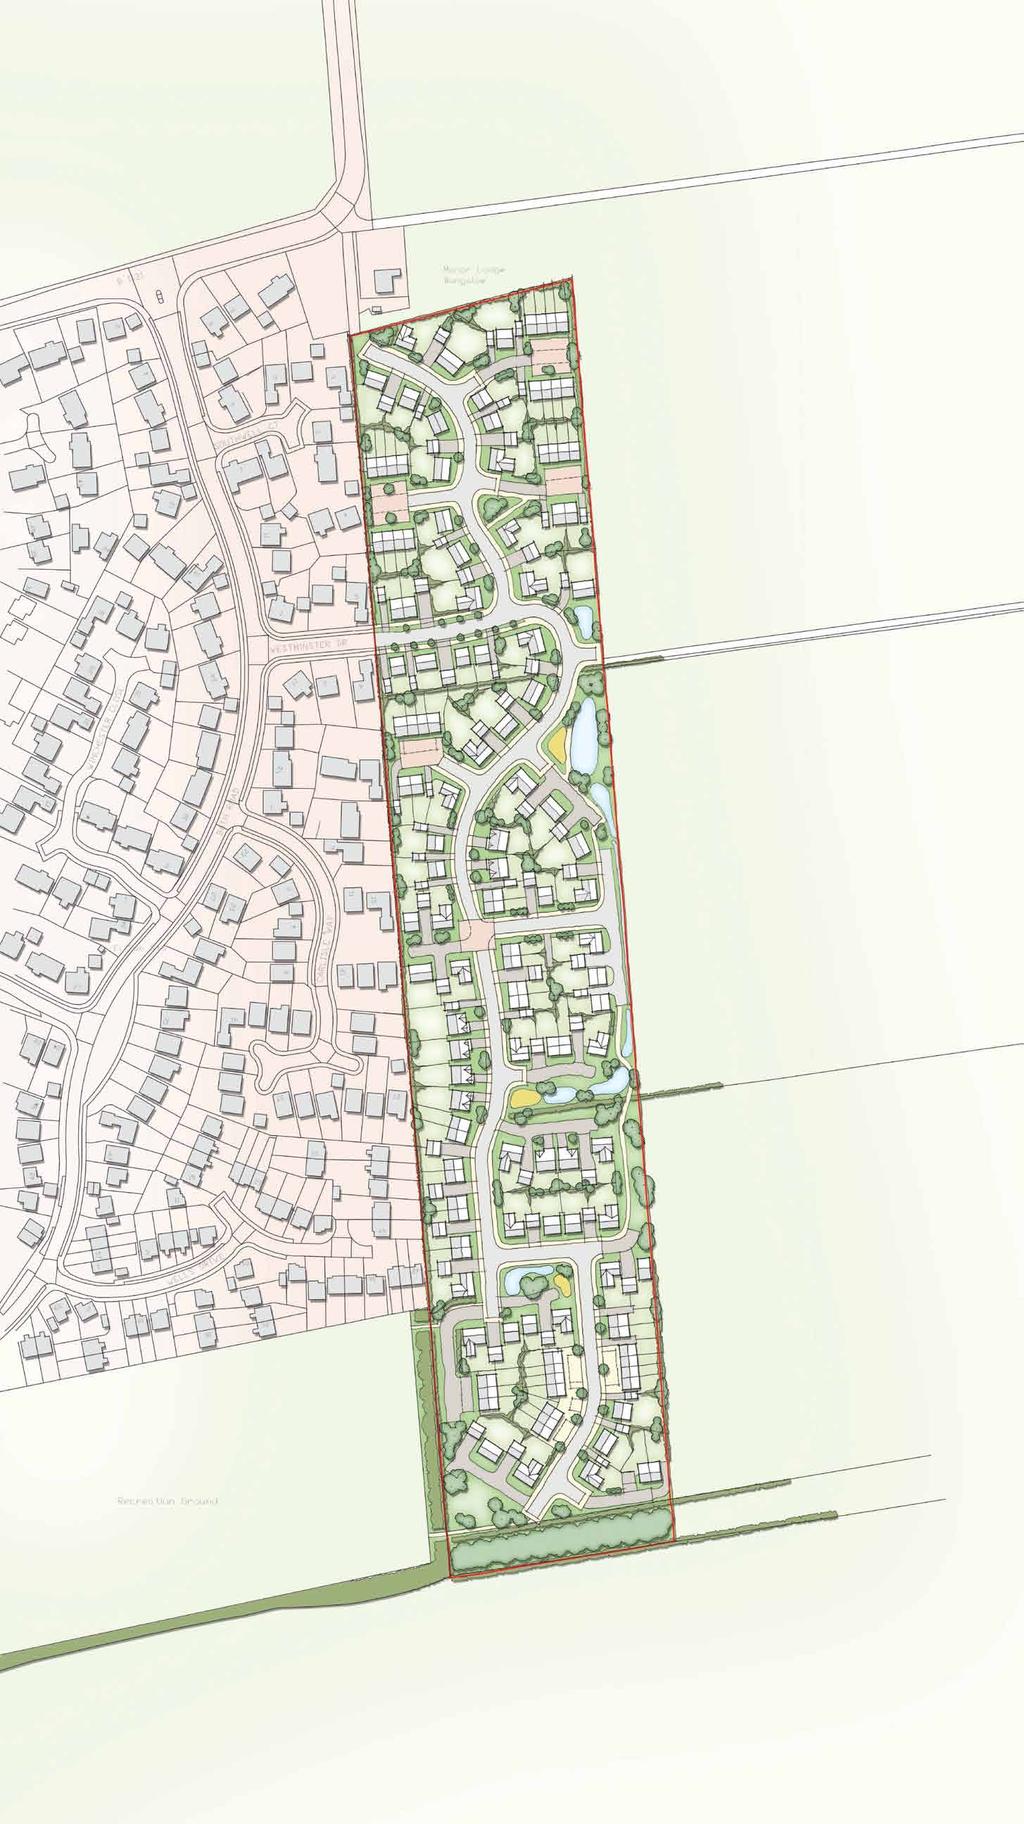 The Masterplan Linden Homes is proposing to submit an outline planning application for up to 150 new homes.